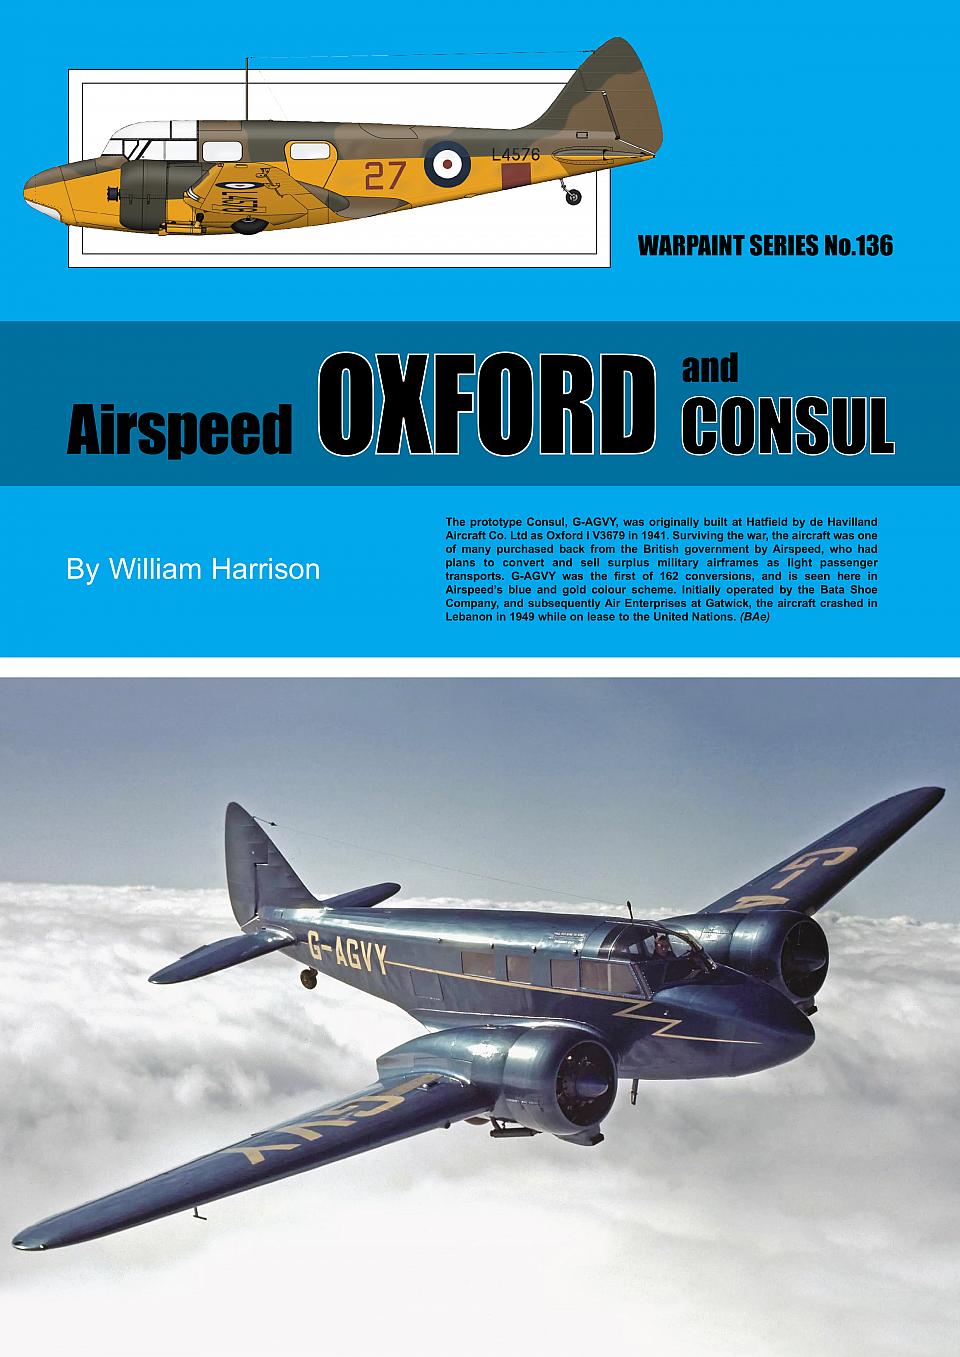 Guideline Publications Ltd Warpaint 136 - Airspeed Oxford & Consul By William Harrison 